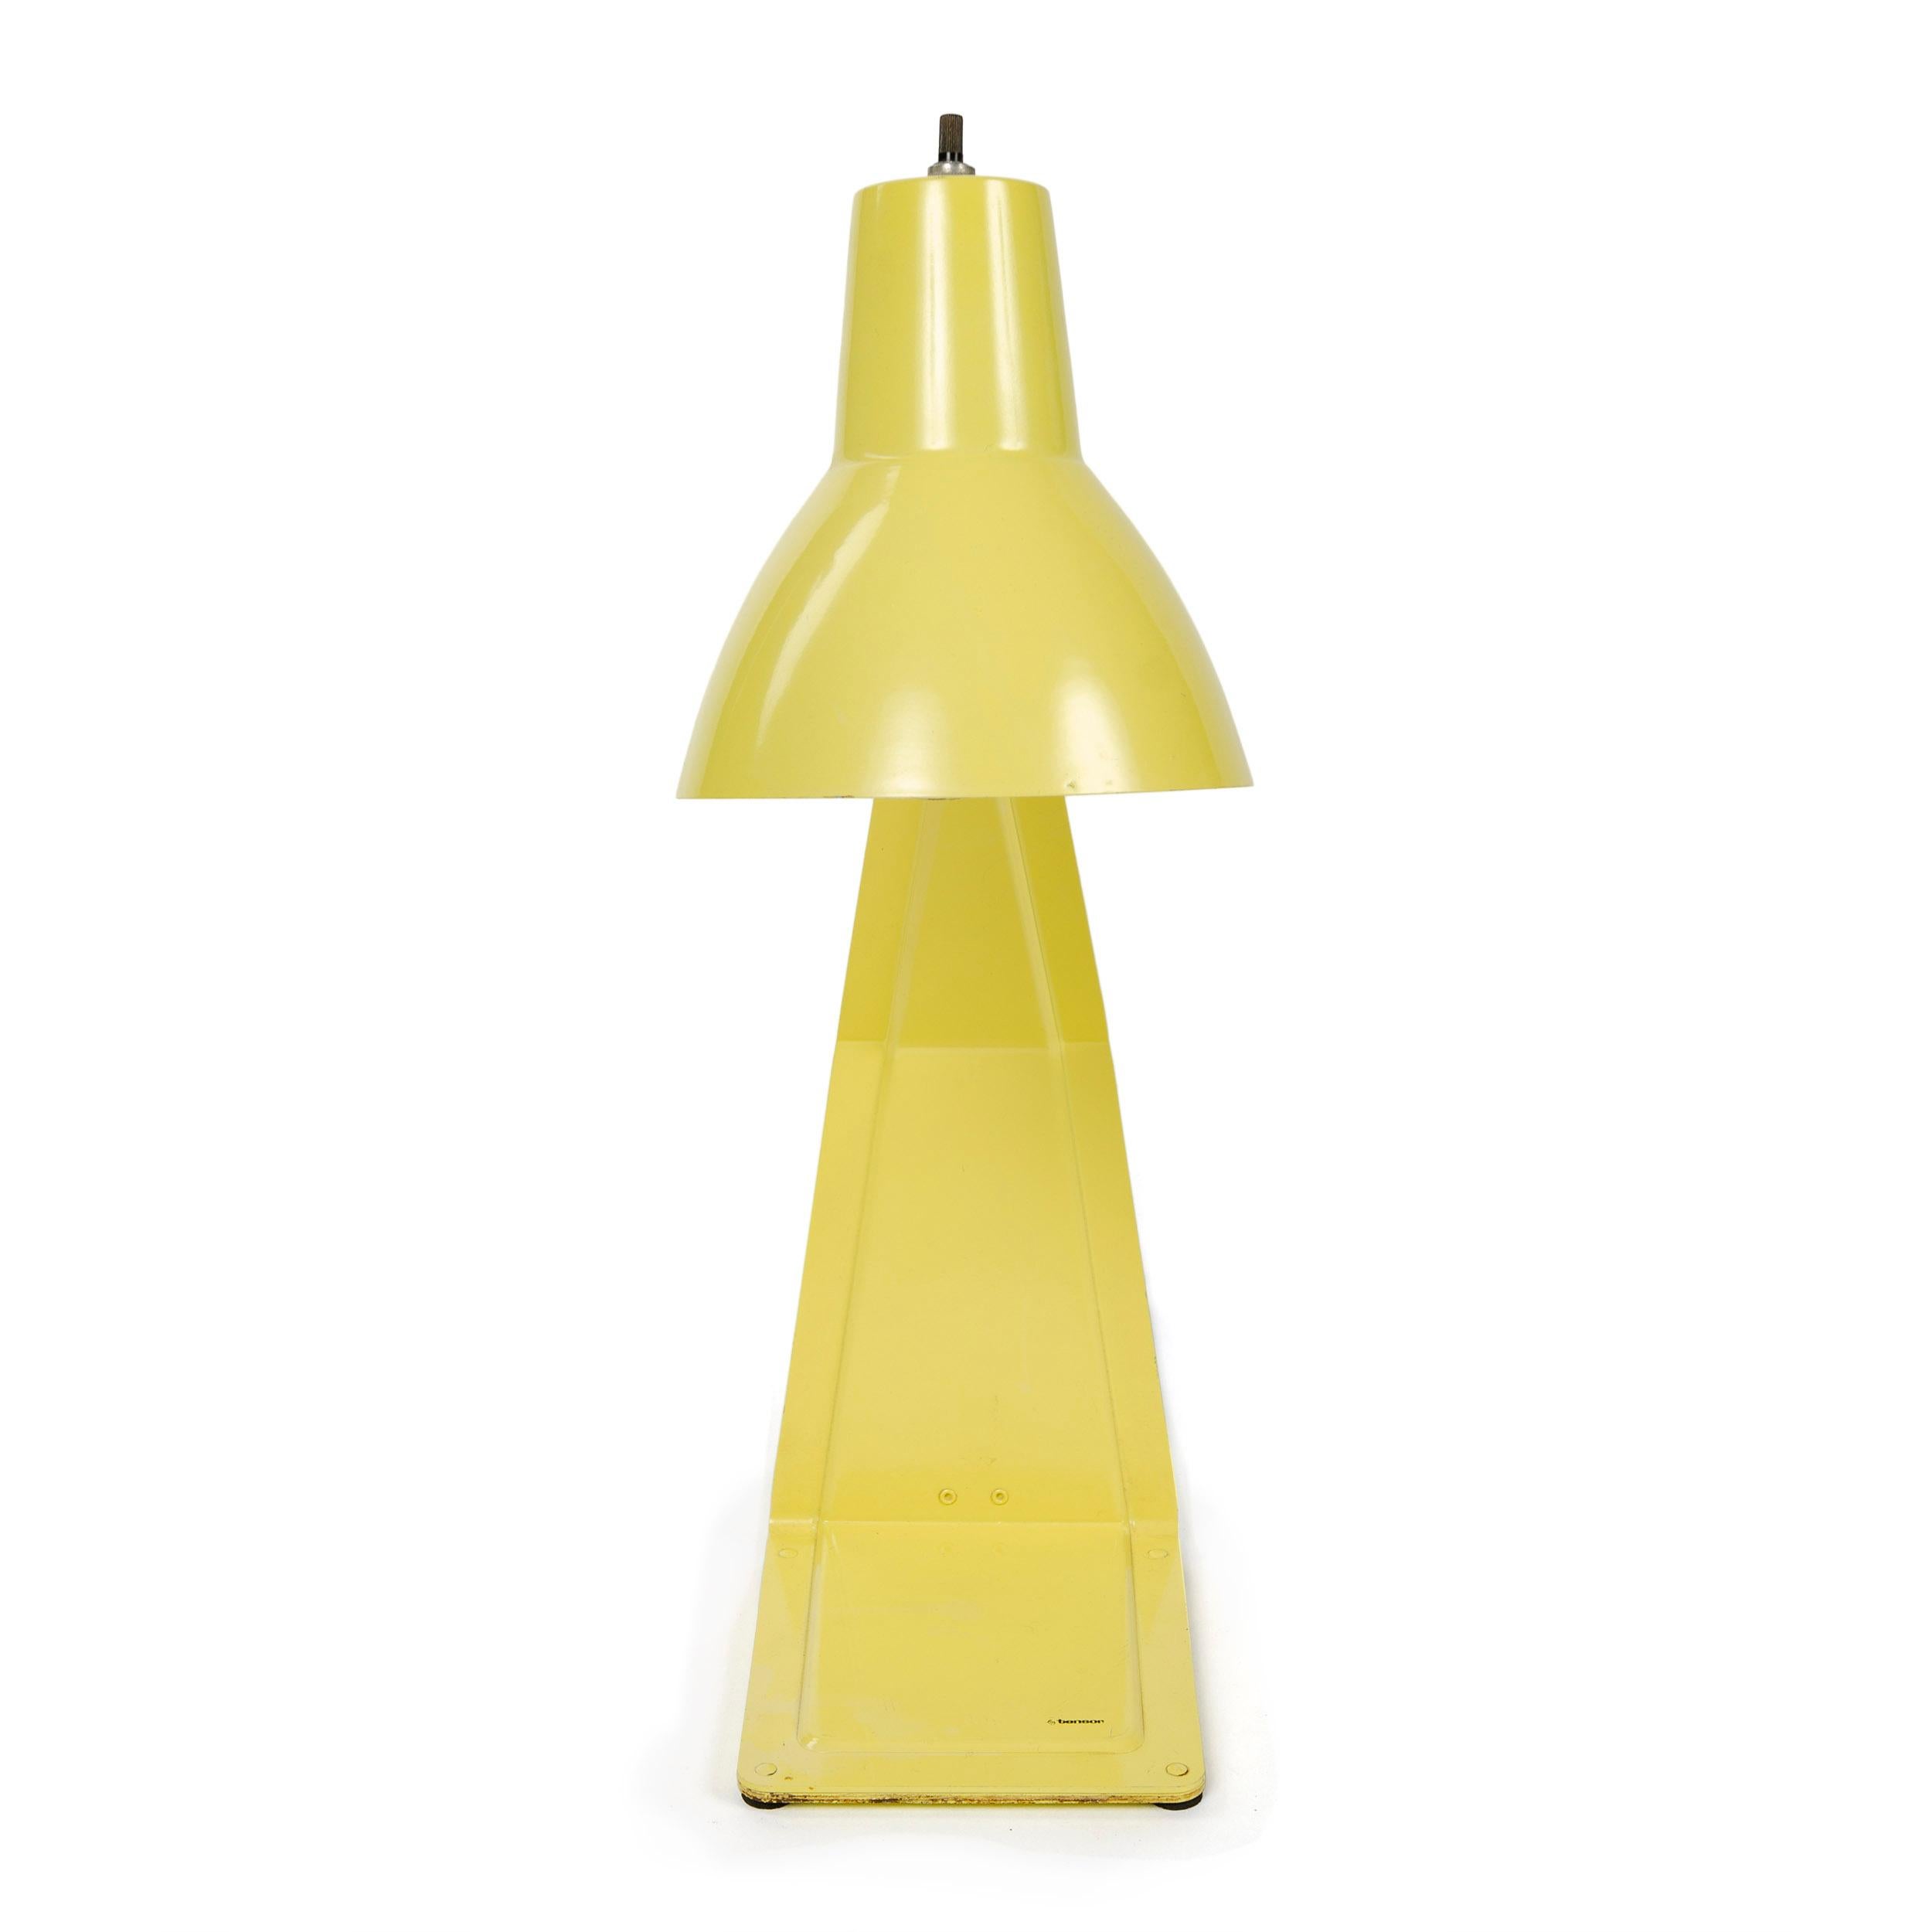 A desk or table lamp made of a singular stamped, die cut and folded piece of metal, painted yellow with a pivoting shade.